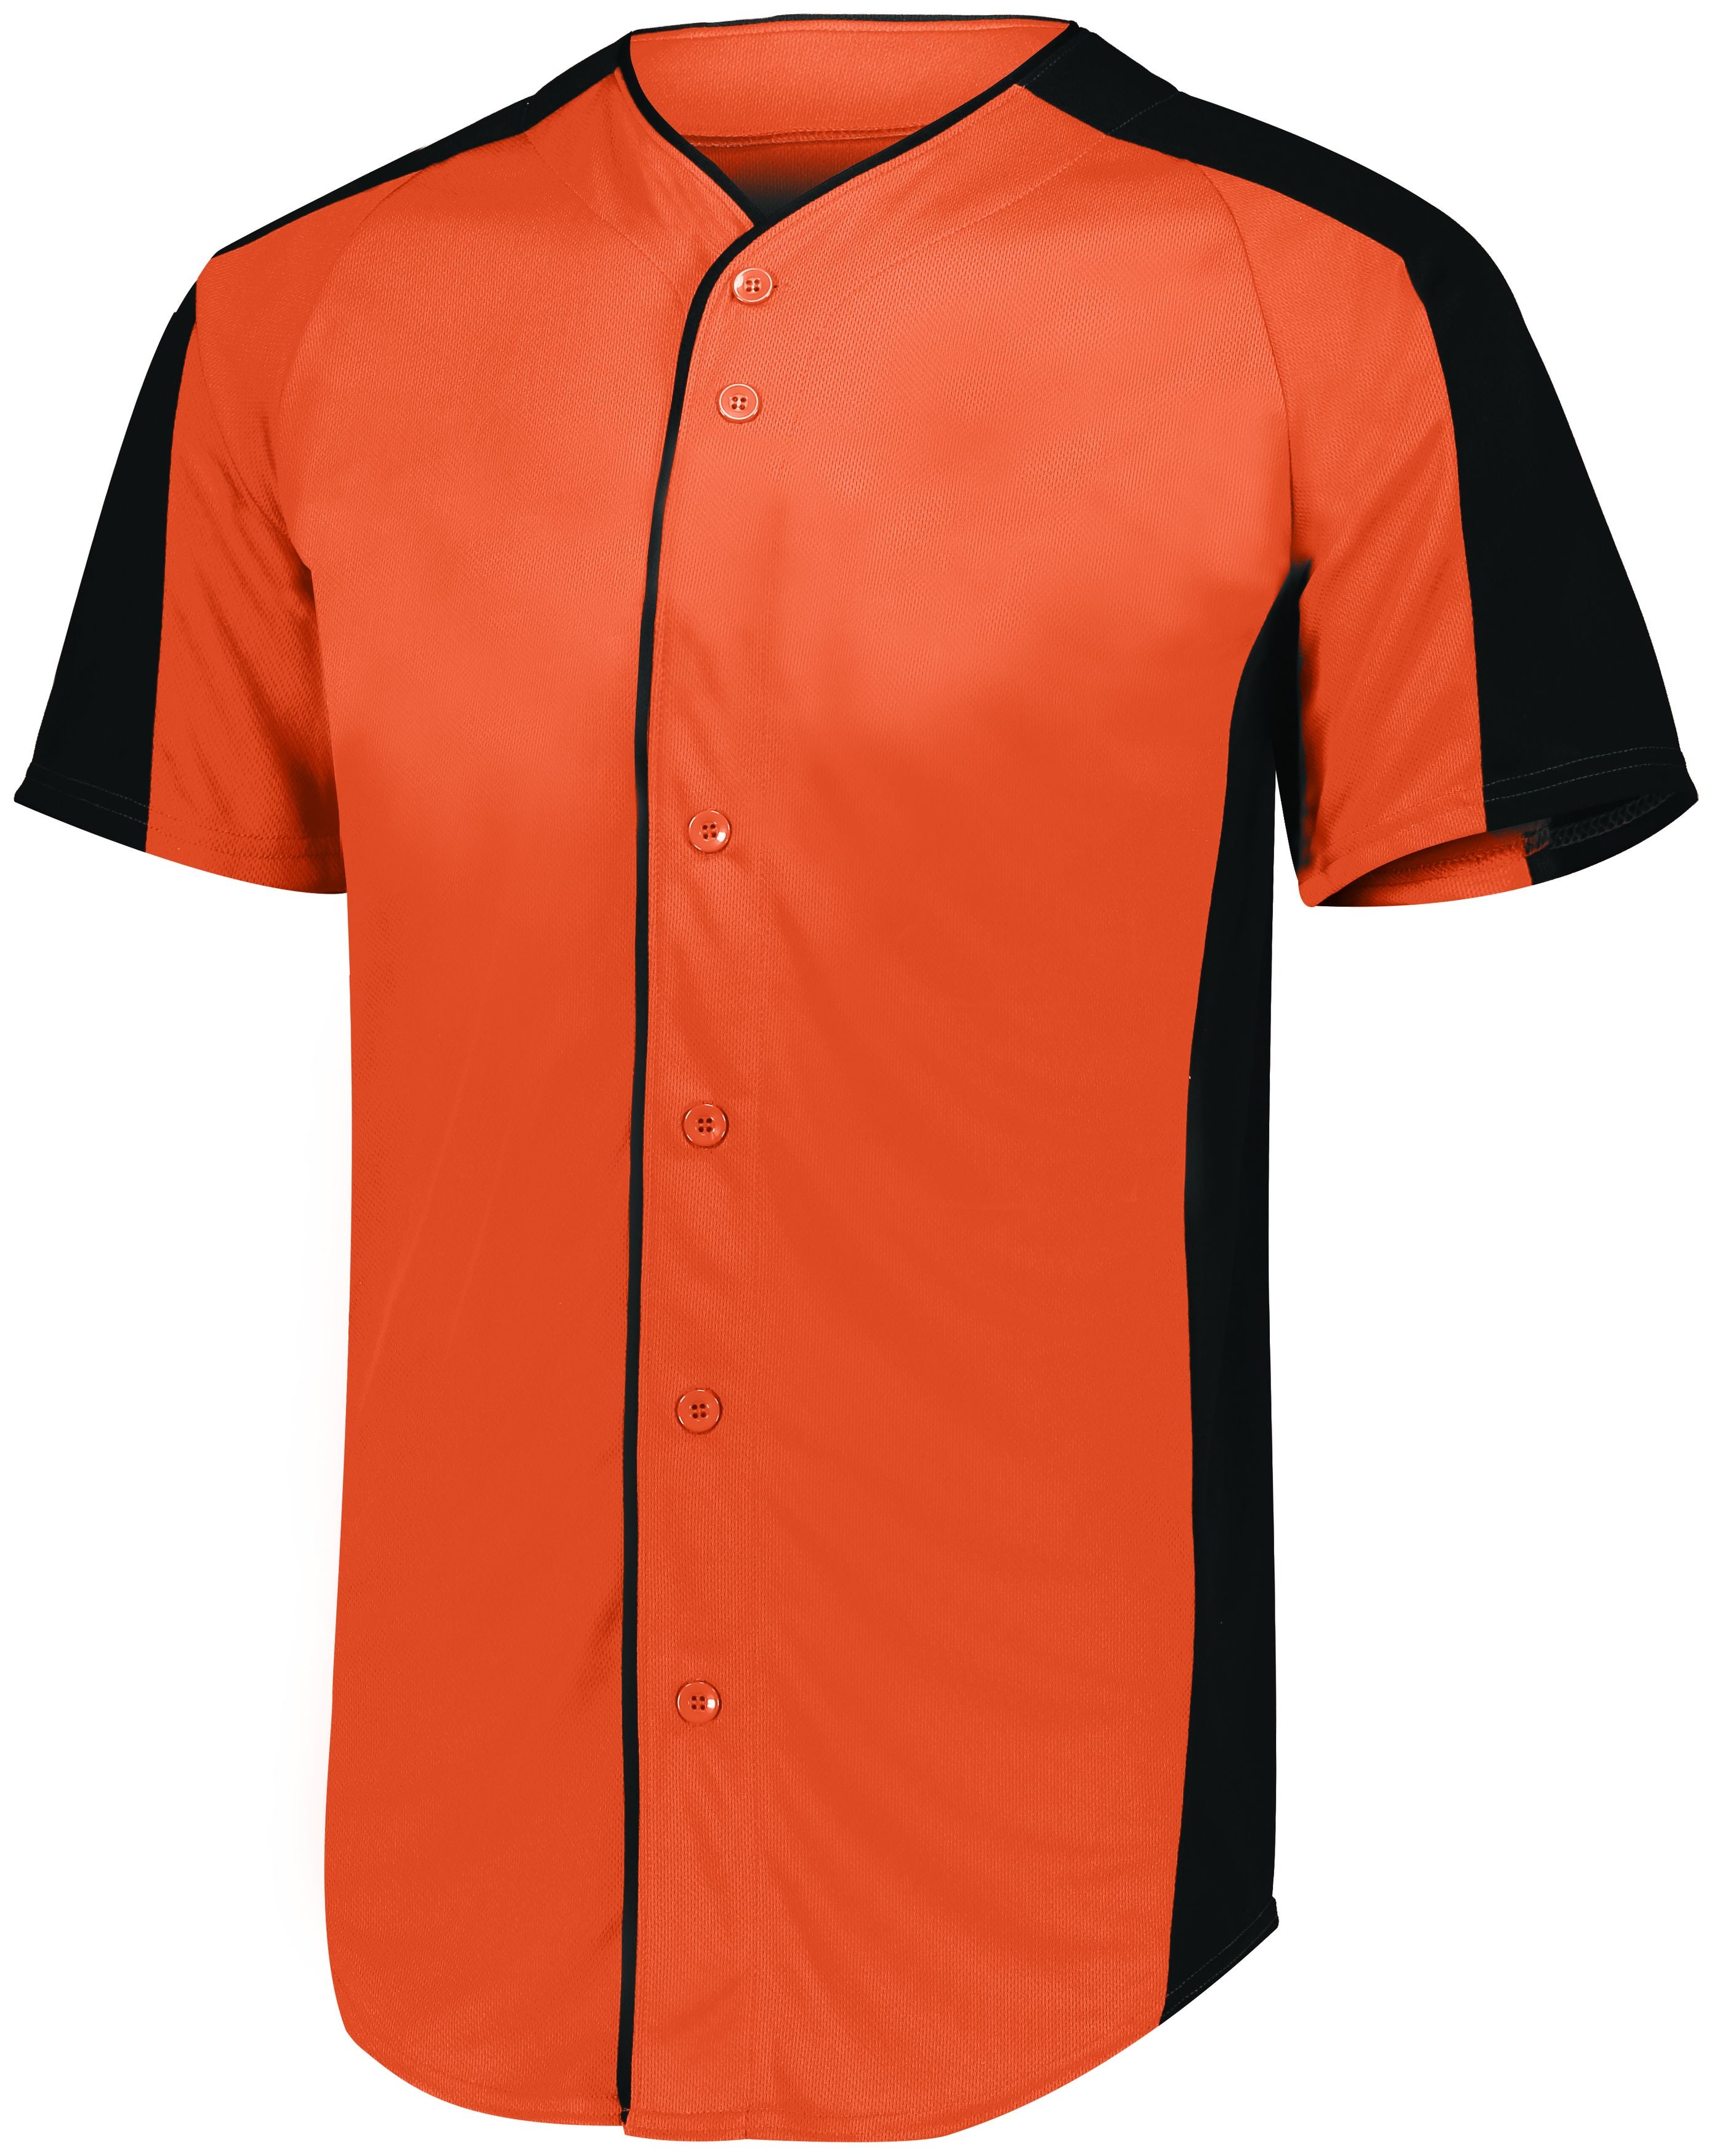 Augusta Sportswear Youth Full-Button Baseball Jersey in Orange/Black  -Part of the Youth, Youth-Jersey, Augusta-Products, Baseball, Shirts, All-Sports, All-Sports-1 product lines at KanaleyCreations.com